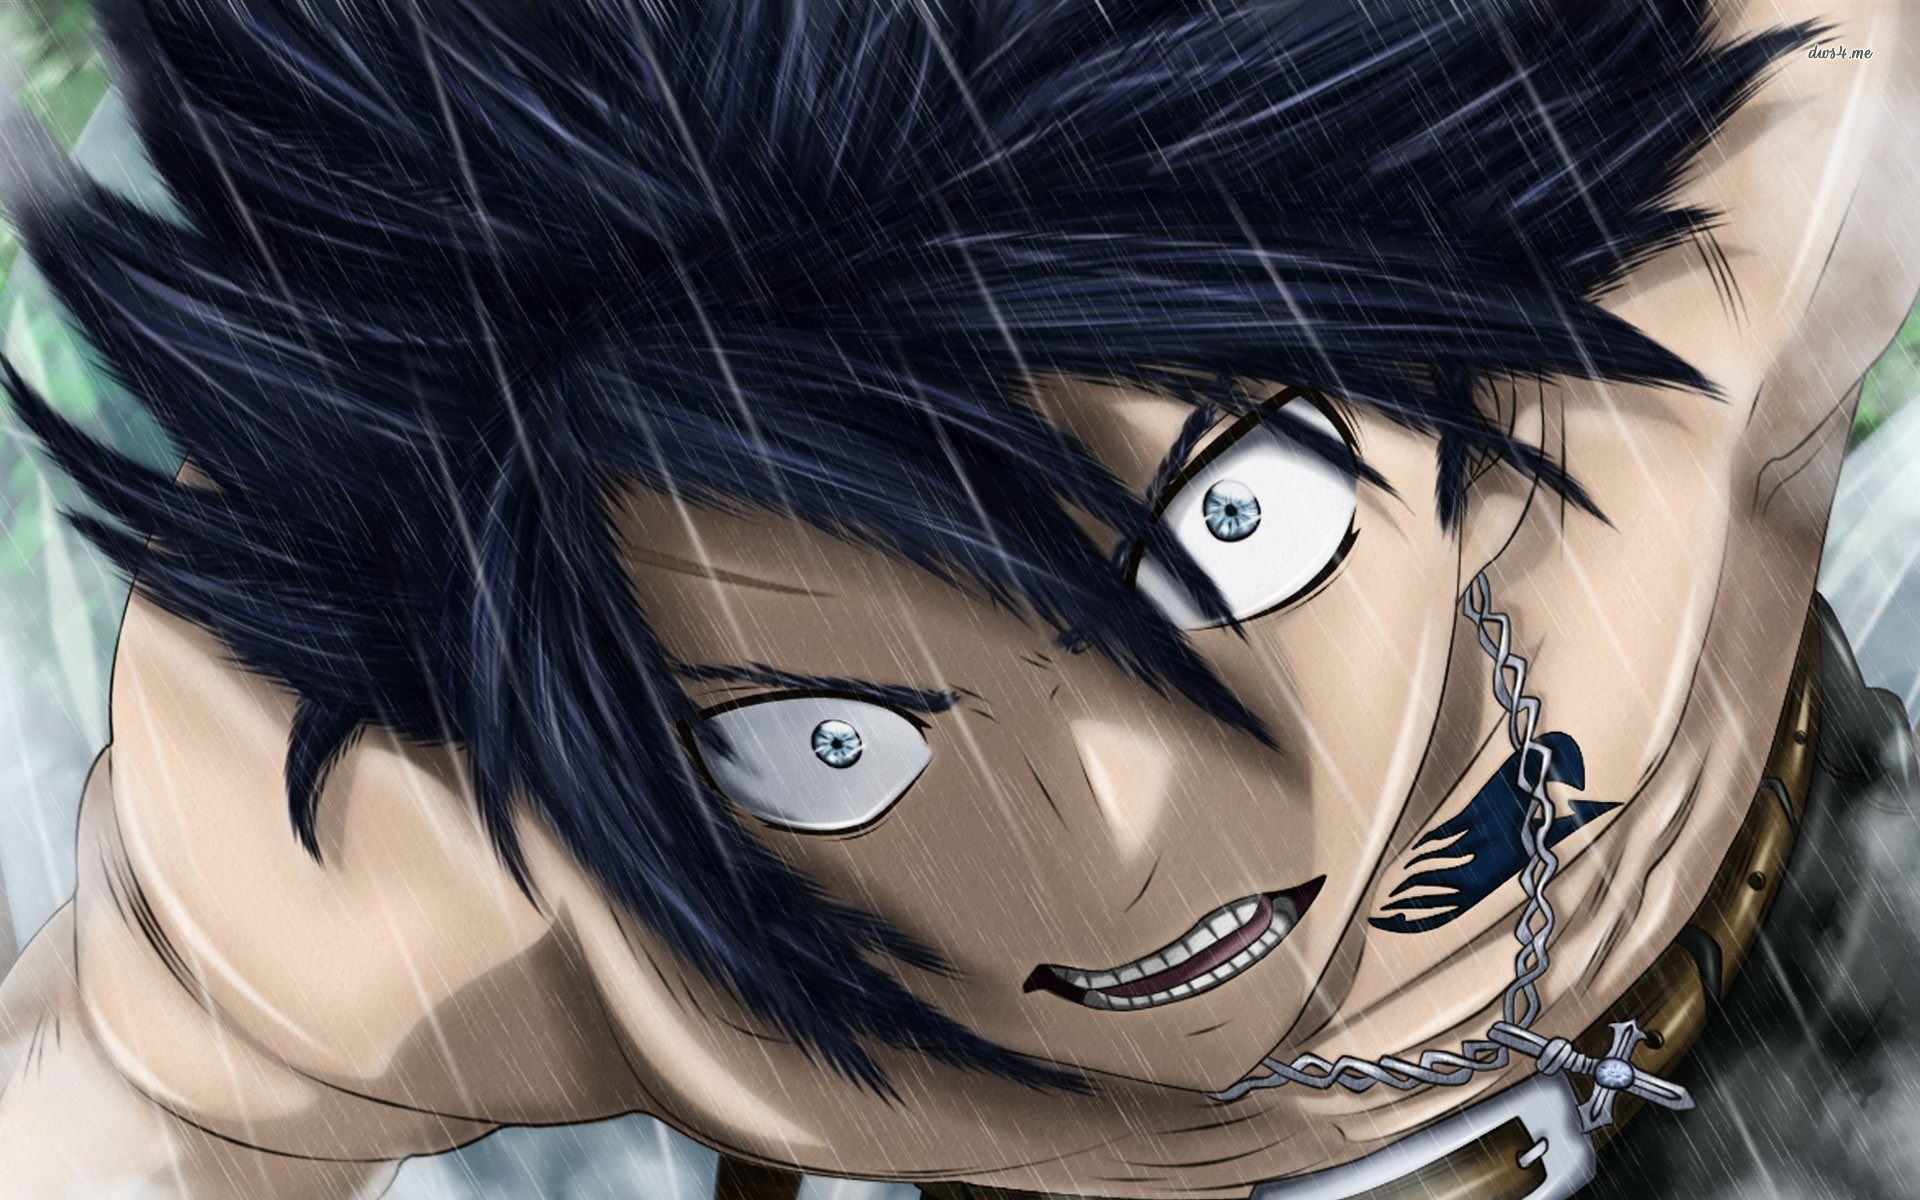 Gray Fullbuster: An Ice-Make Mage, A member of the Fairy Tail Guild, Japanese manga. 1920x1200 HD Wallpaper.